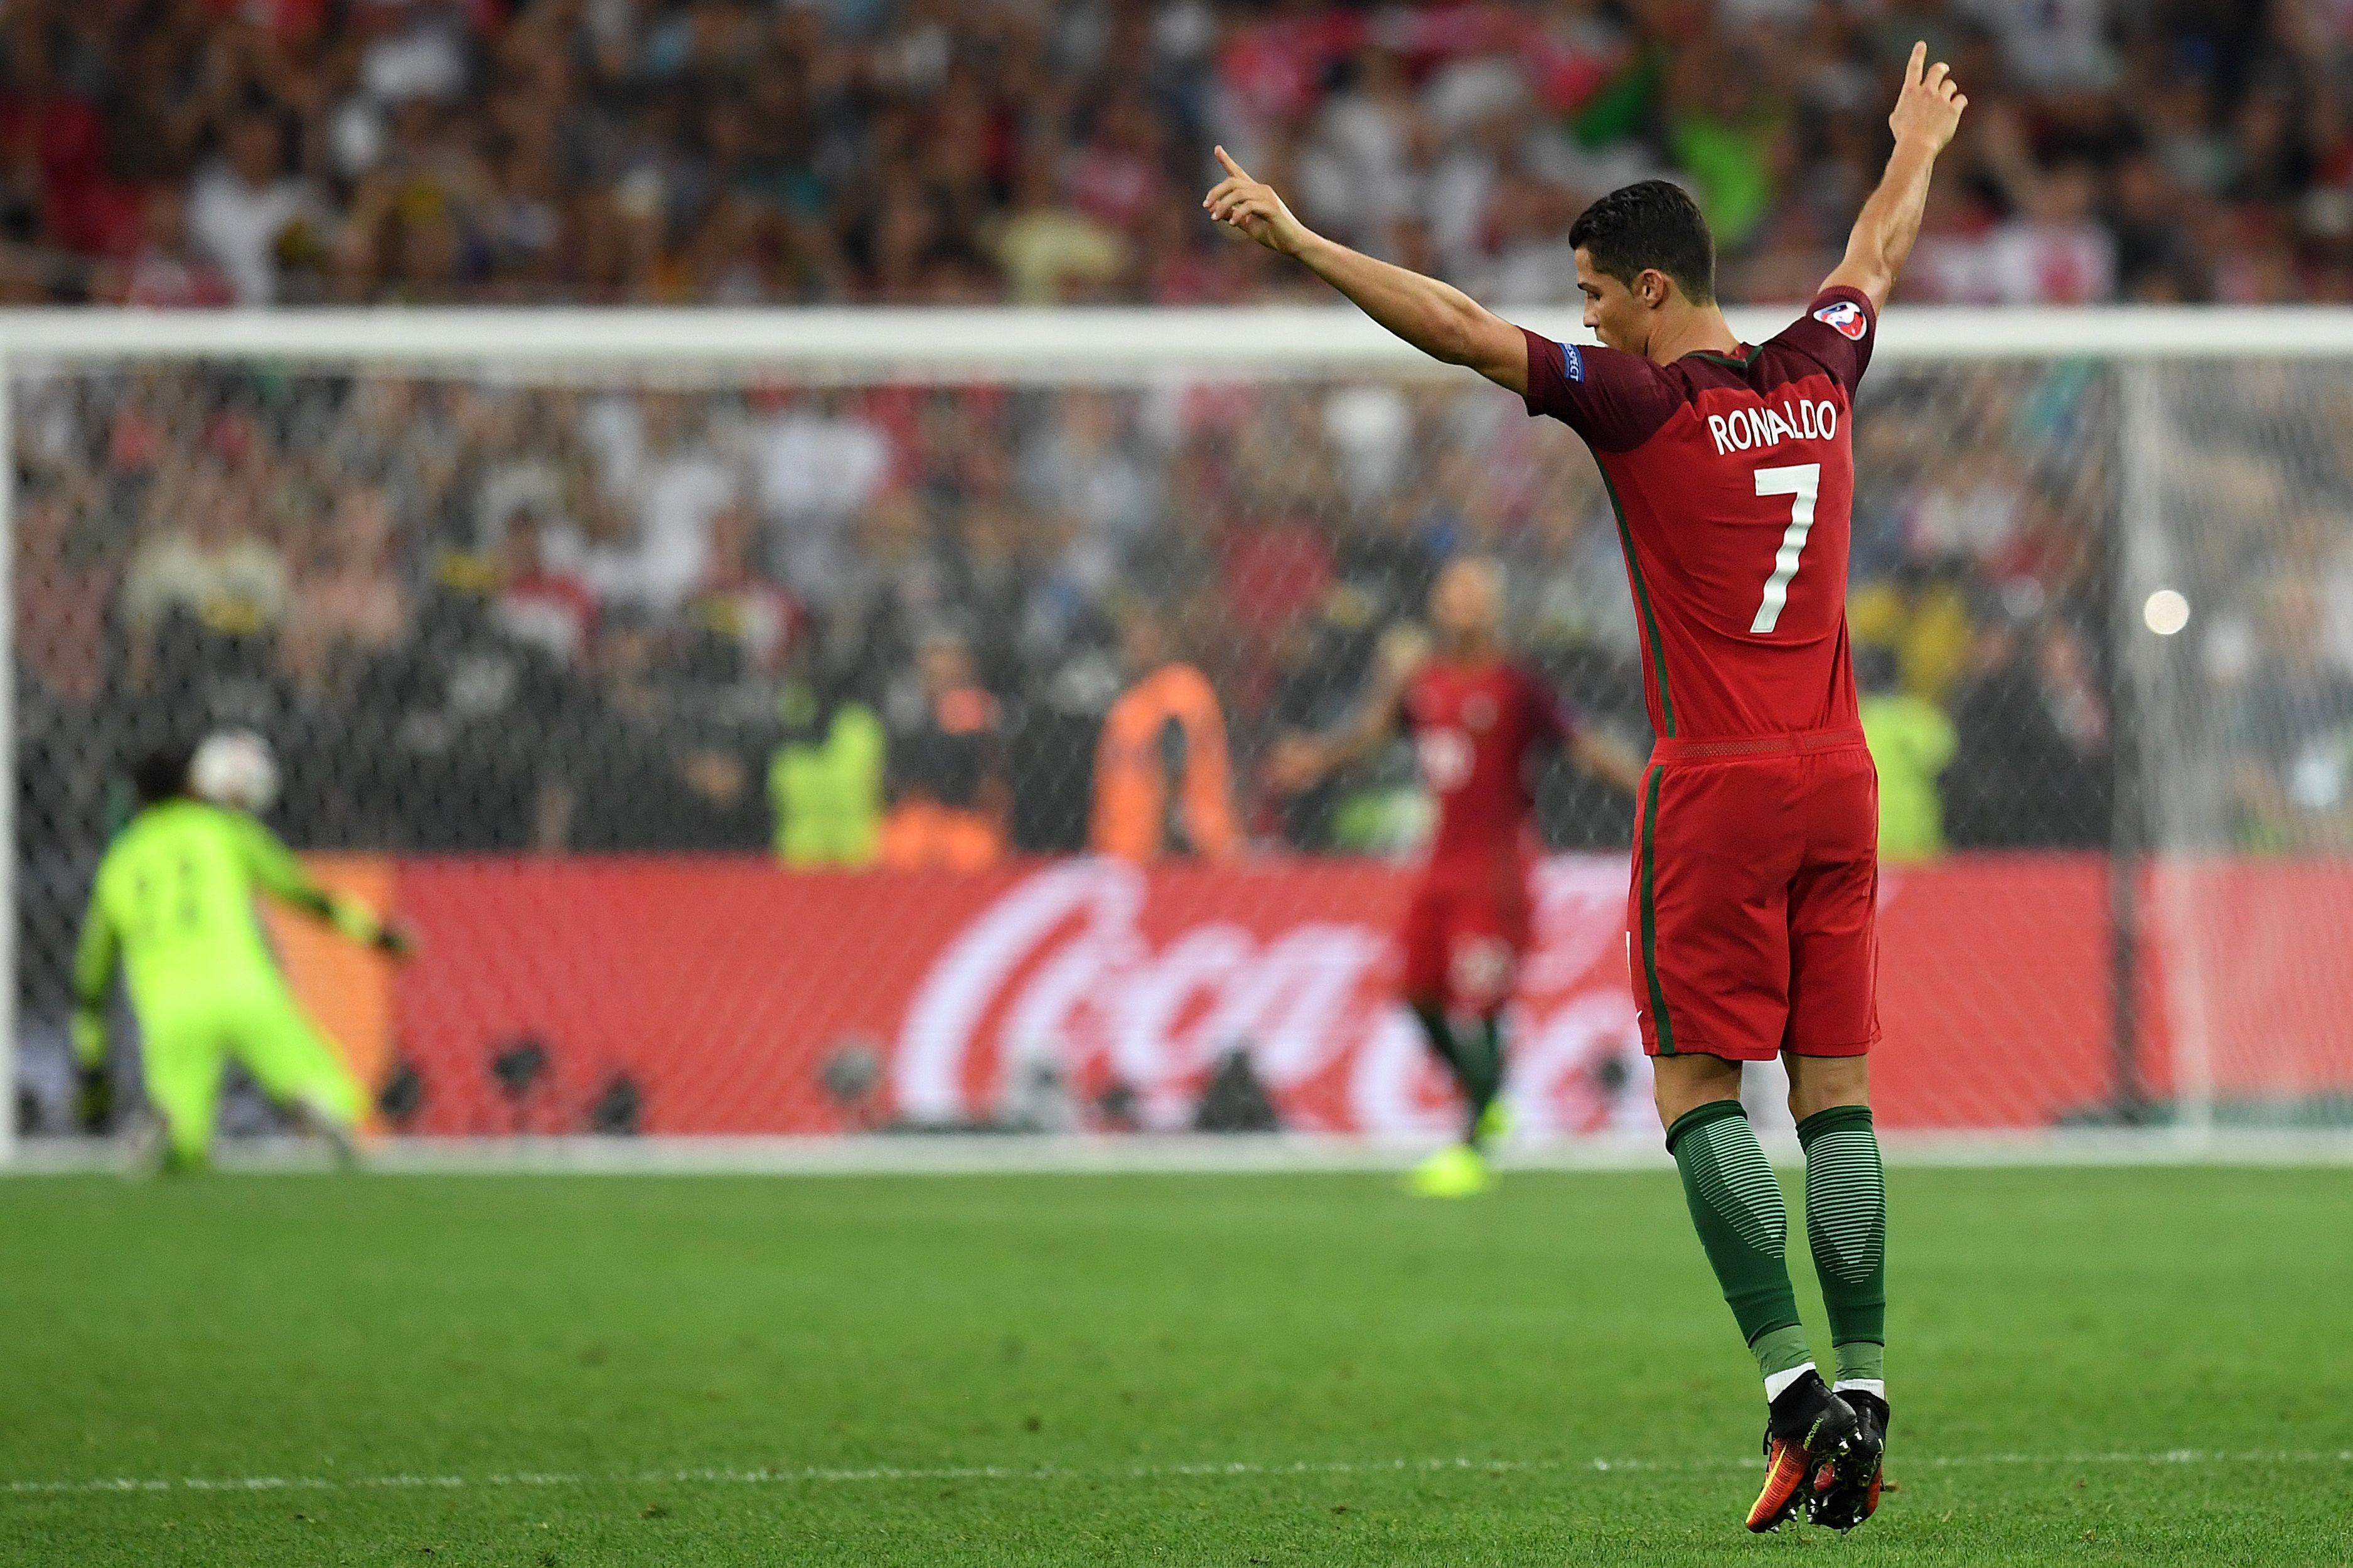 Portugal's forward Cristiano Ronaldo celebrates after Portugal's forward Ricardo Quaresma scored the winning goal in a penalty shoot-out during the Euro 2016 quarter-final football match between Poland and Portugal at the Stade Velodrome in Marseille on June 30, 2016. / AFP / FRANCISCO LEONG        (Photo credit should read FRANCISCO LEONG/AFP/Getty Images)